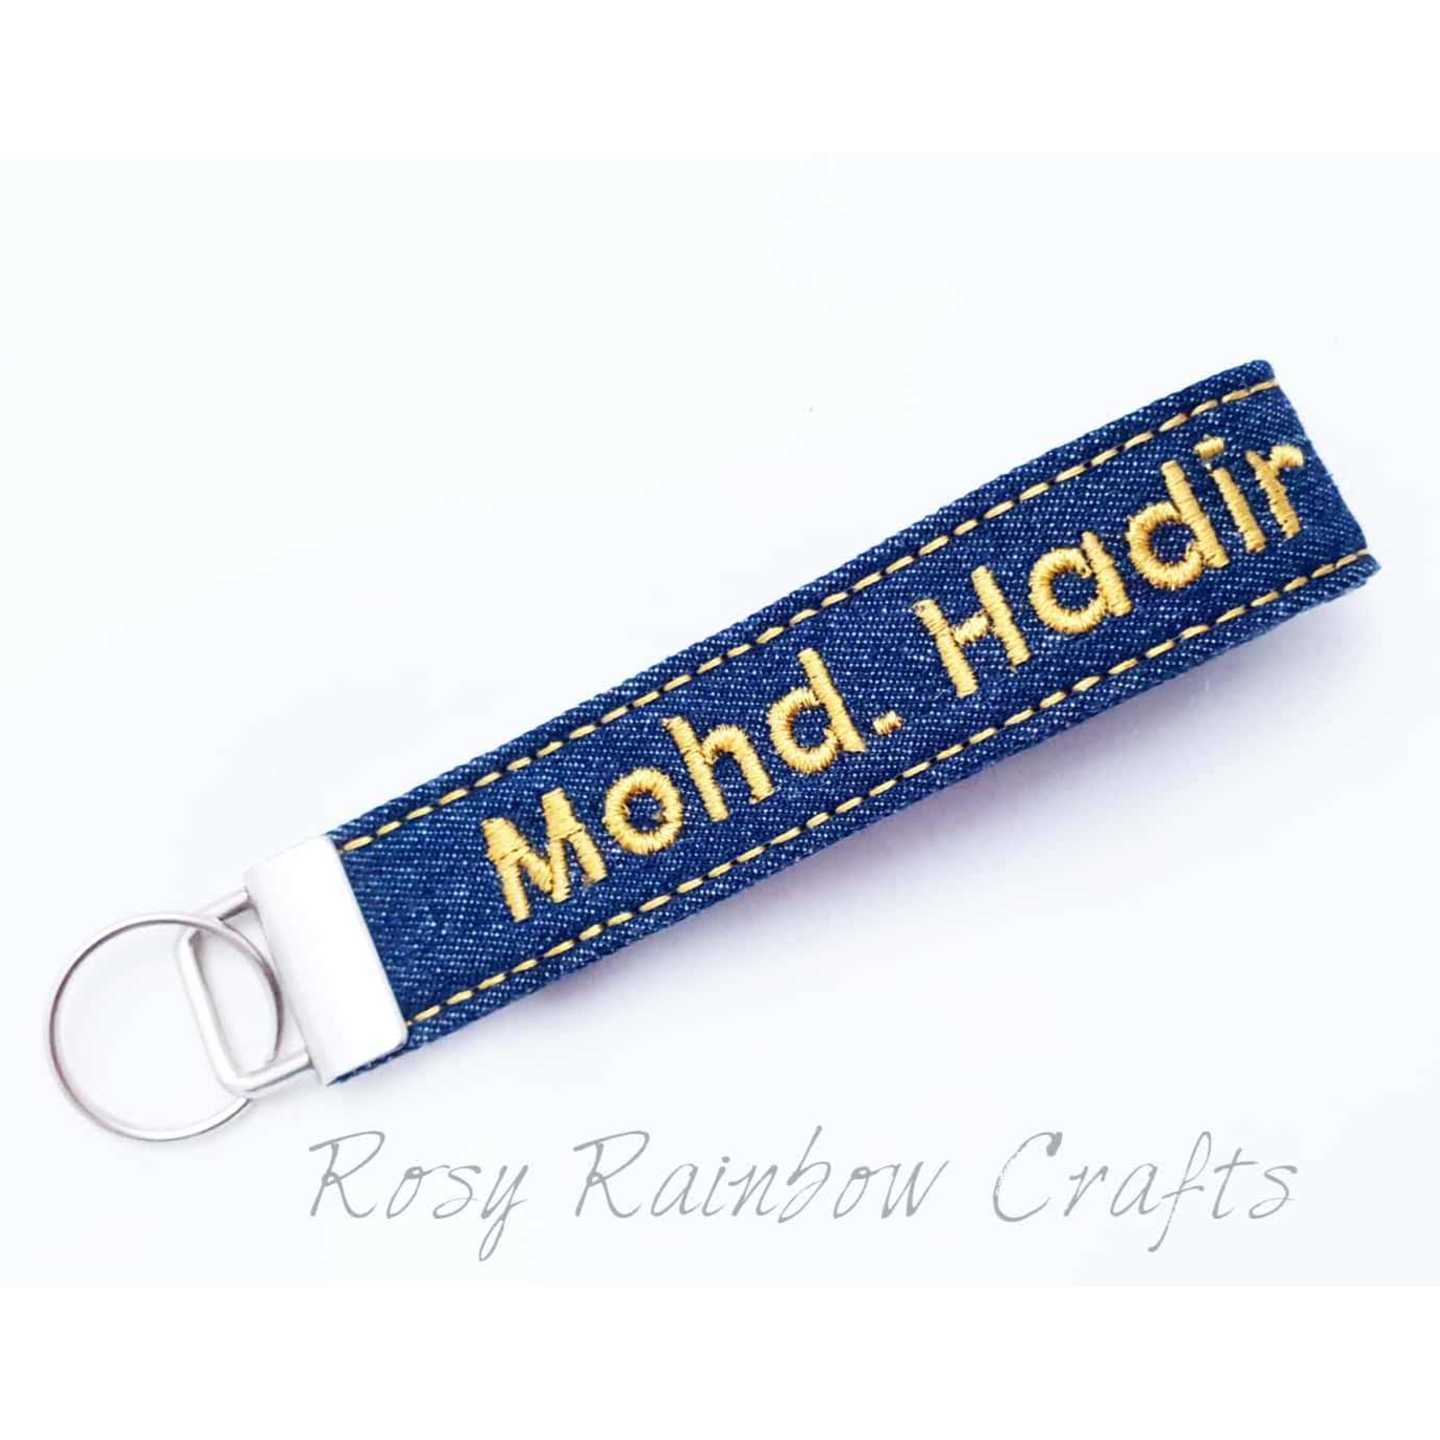 Exclusive Handmade Embroidered Custom Made To Order Key-FobKey-Chain Denim Series